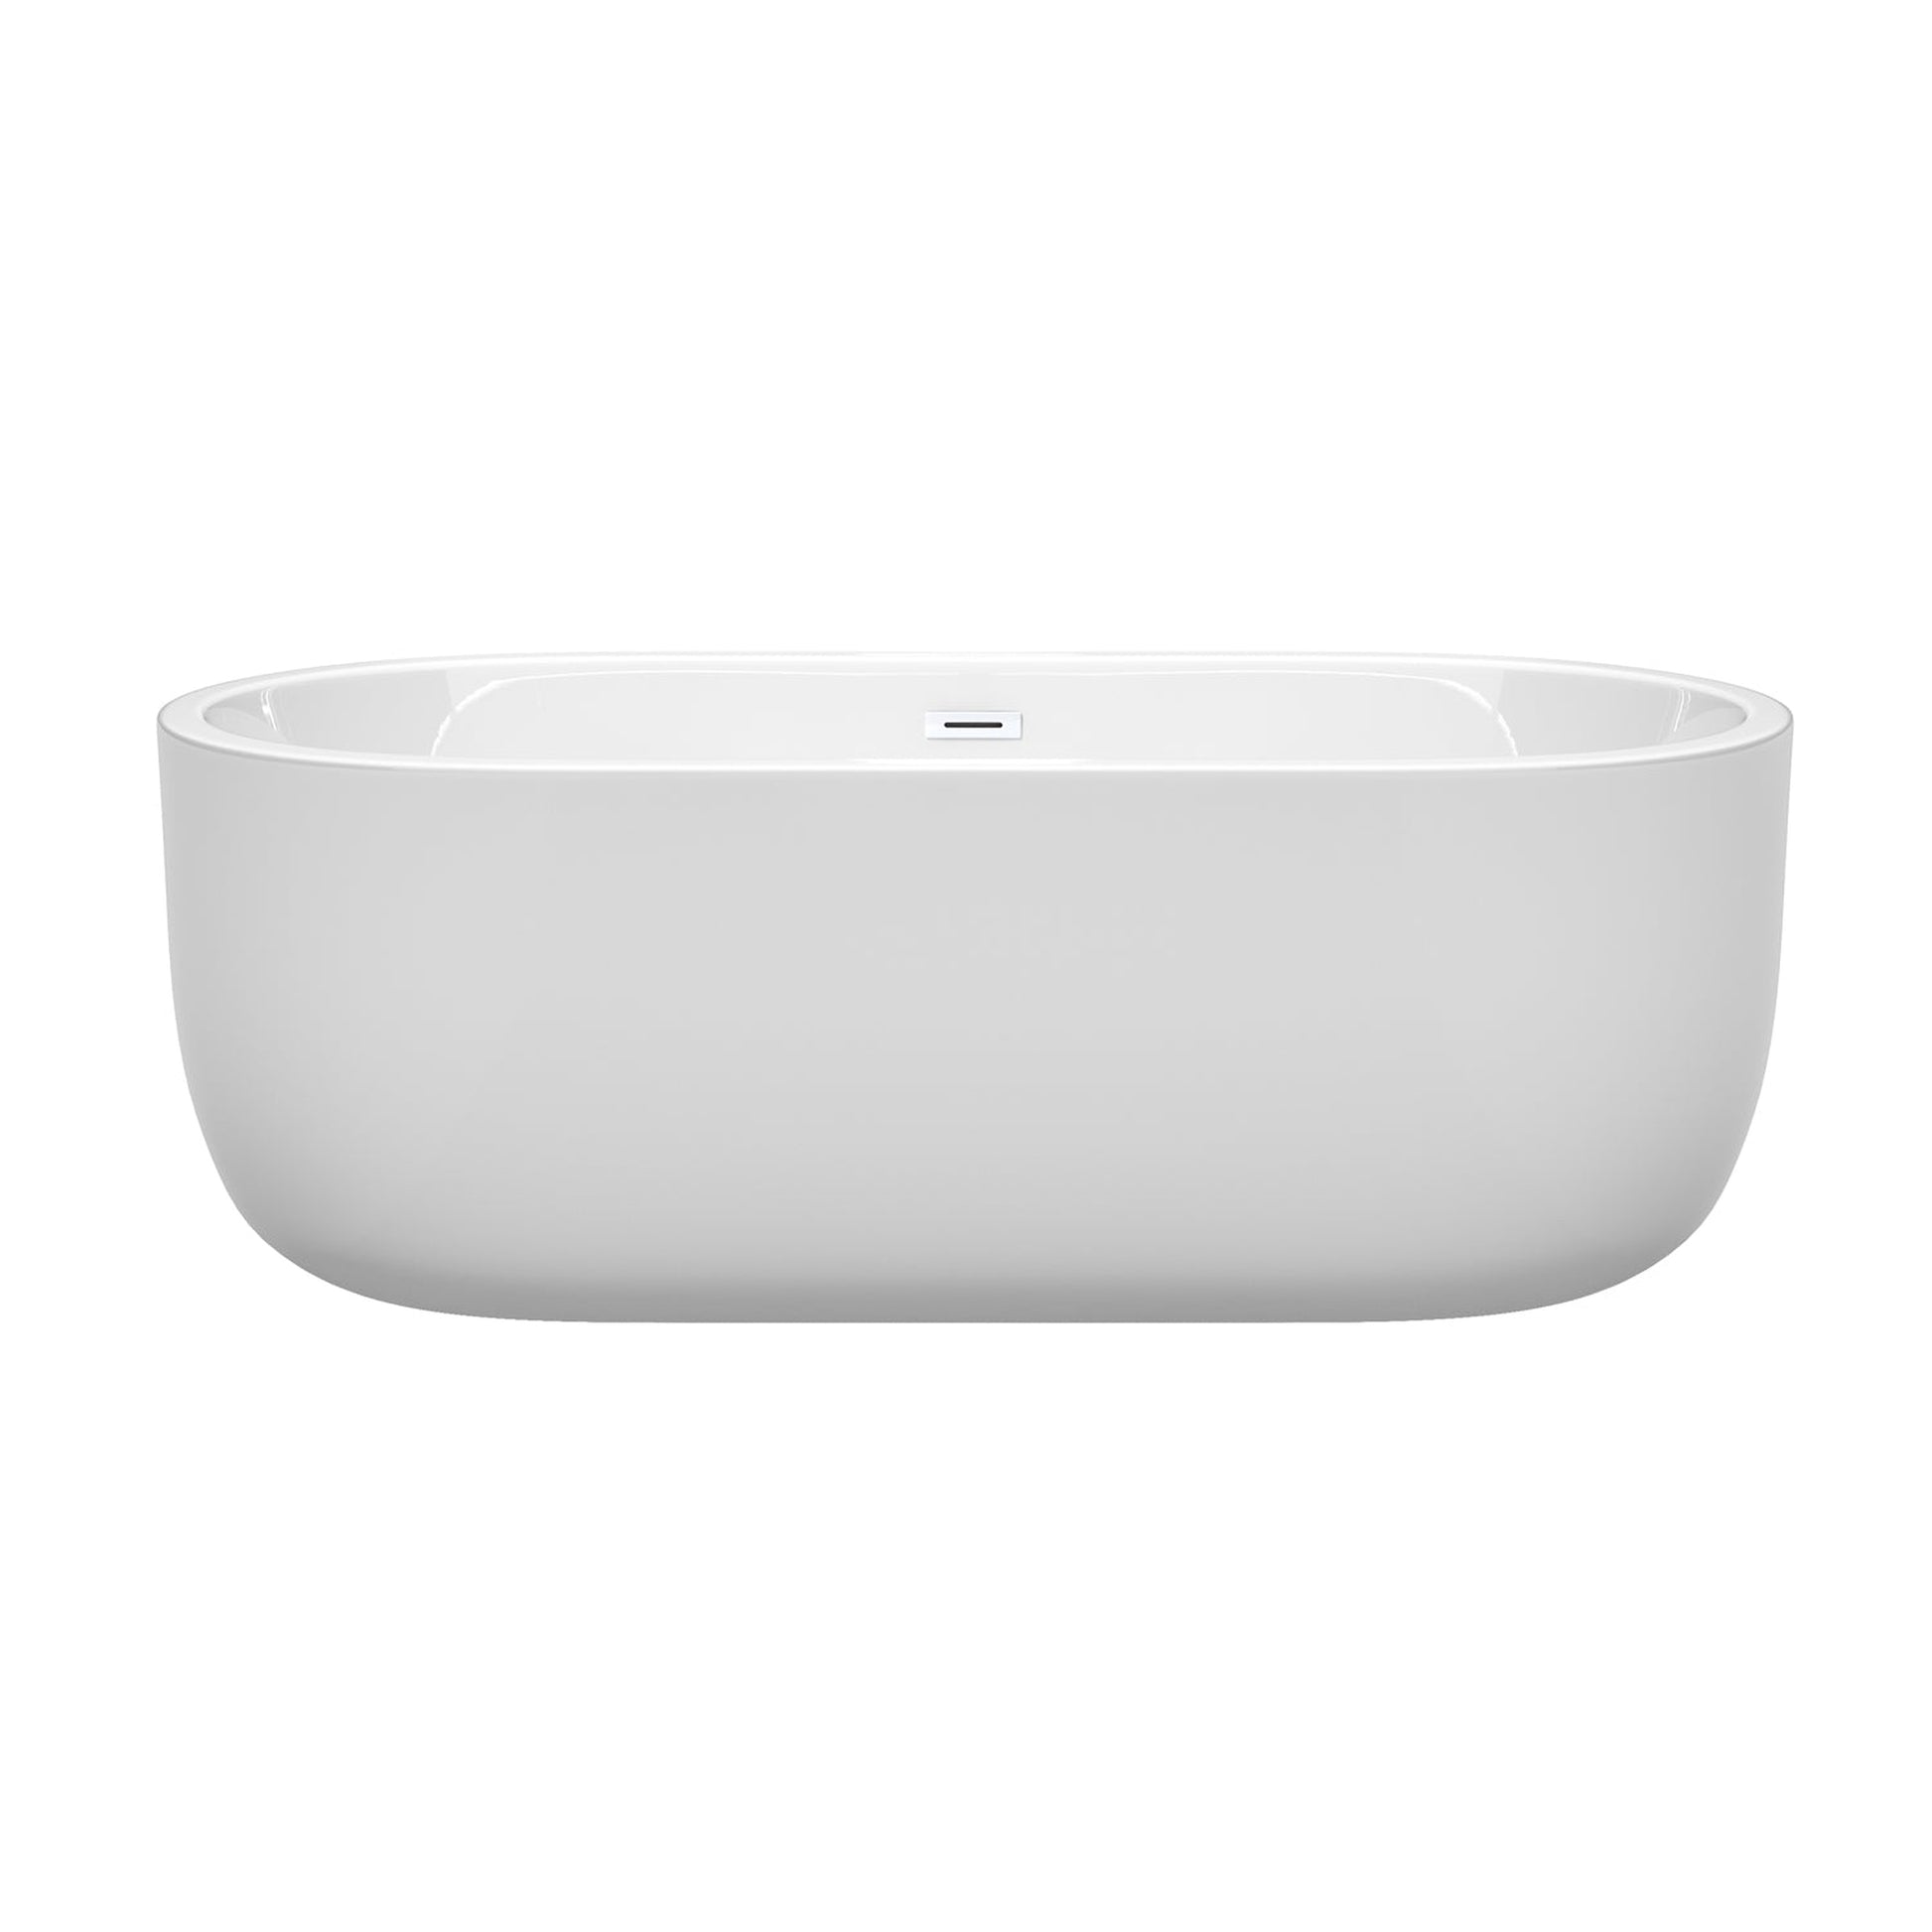 Wyndham Collection Juliette 67" Freestanding Bathtub in White With Shiny White Drain and Overflow Trim